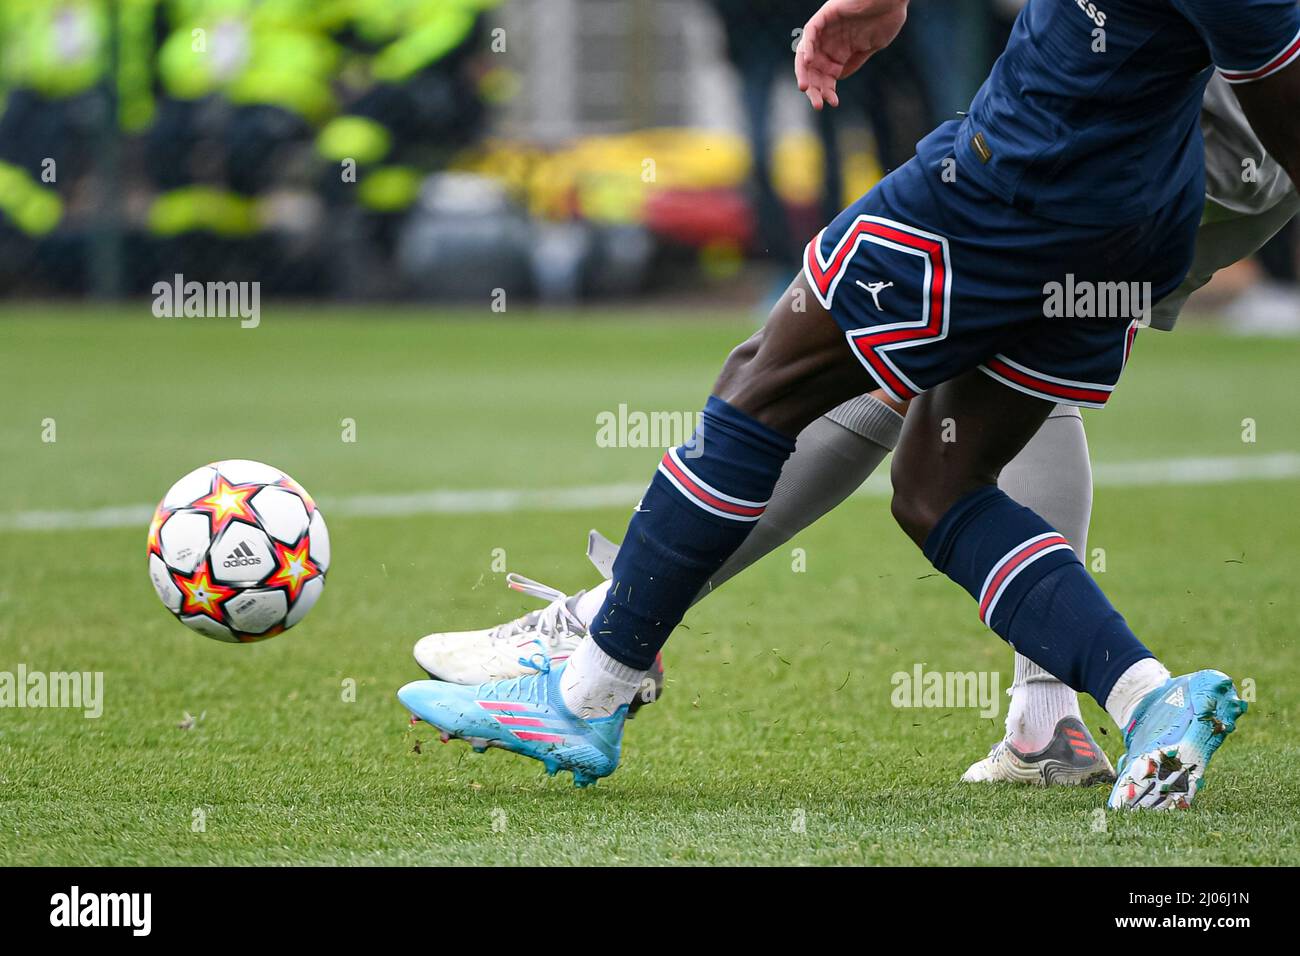 Saint Germain En Laye, France. 16th Mar, 2022. Illustration picture shows  the official Adidas ball at a player's feet during the UEFA Youth League ( U19), Quarter-finals football match between Paris Saint-Germain (PSG)